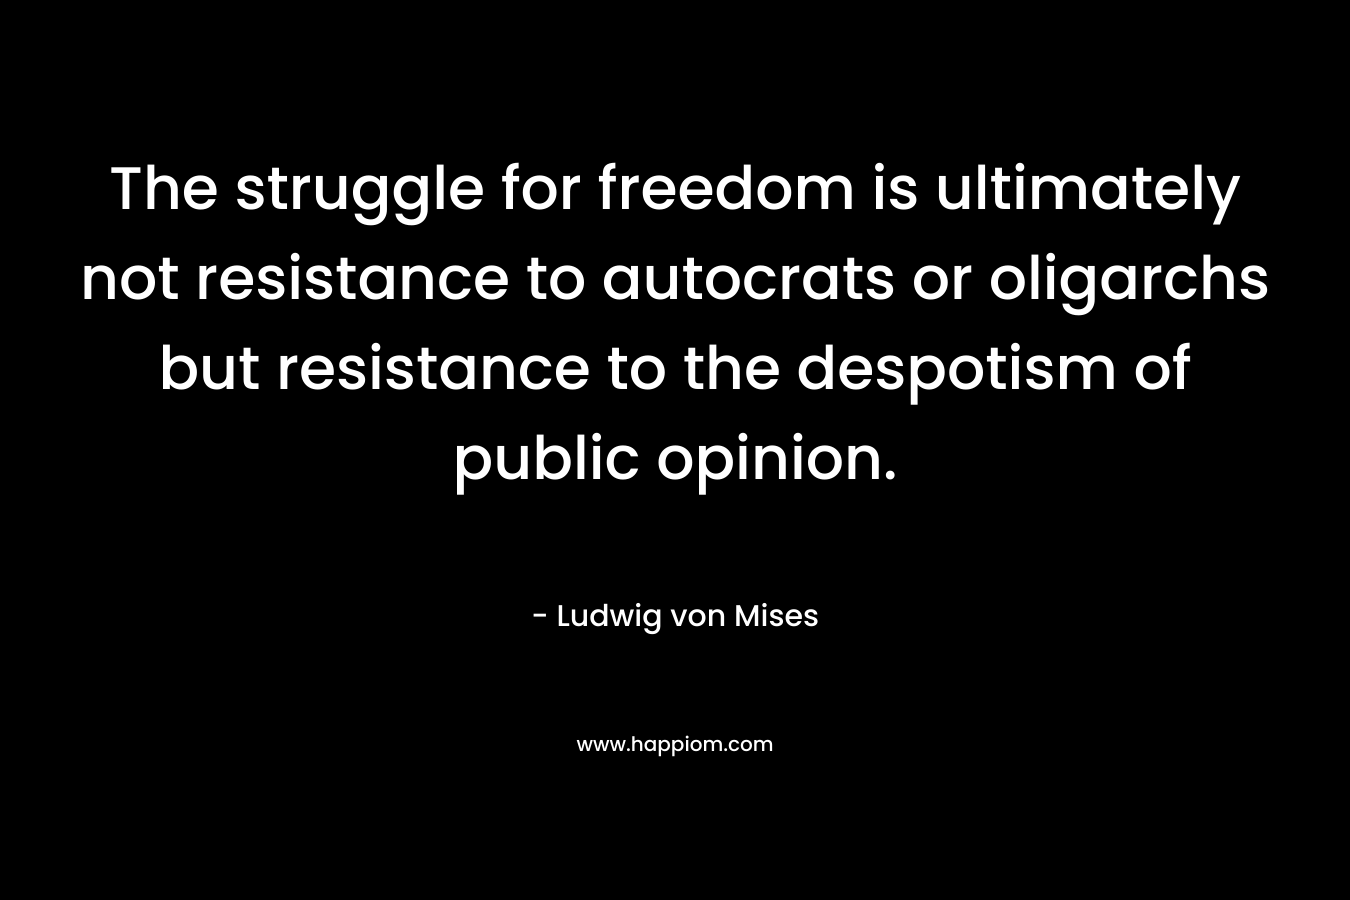 The struggle for freedom is ultimately not resistance to autocrats or oligarchs but resistance to the despotism of public opinion. – Ludwig von Mises